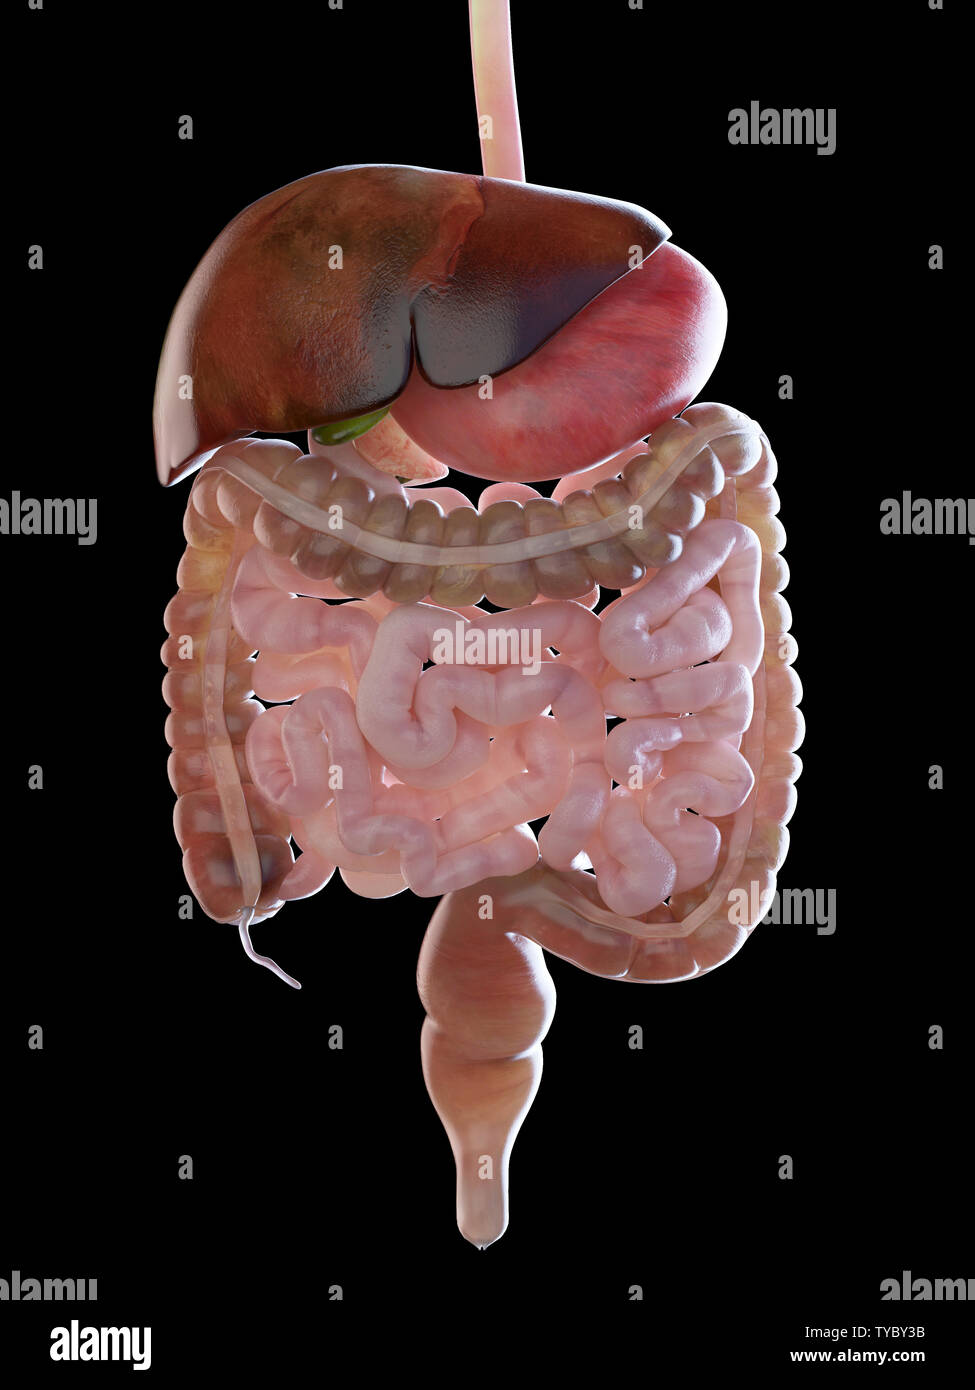 3d rendered medically accurate illustration of the digestive system Stock Photo